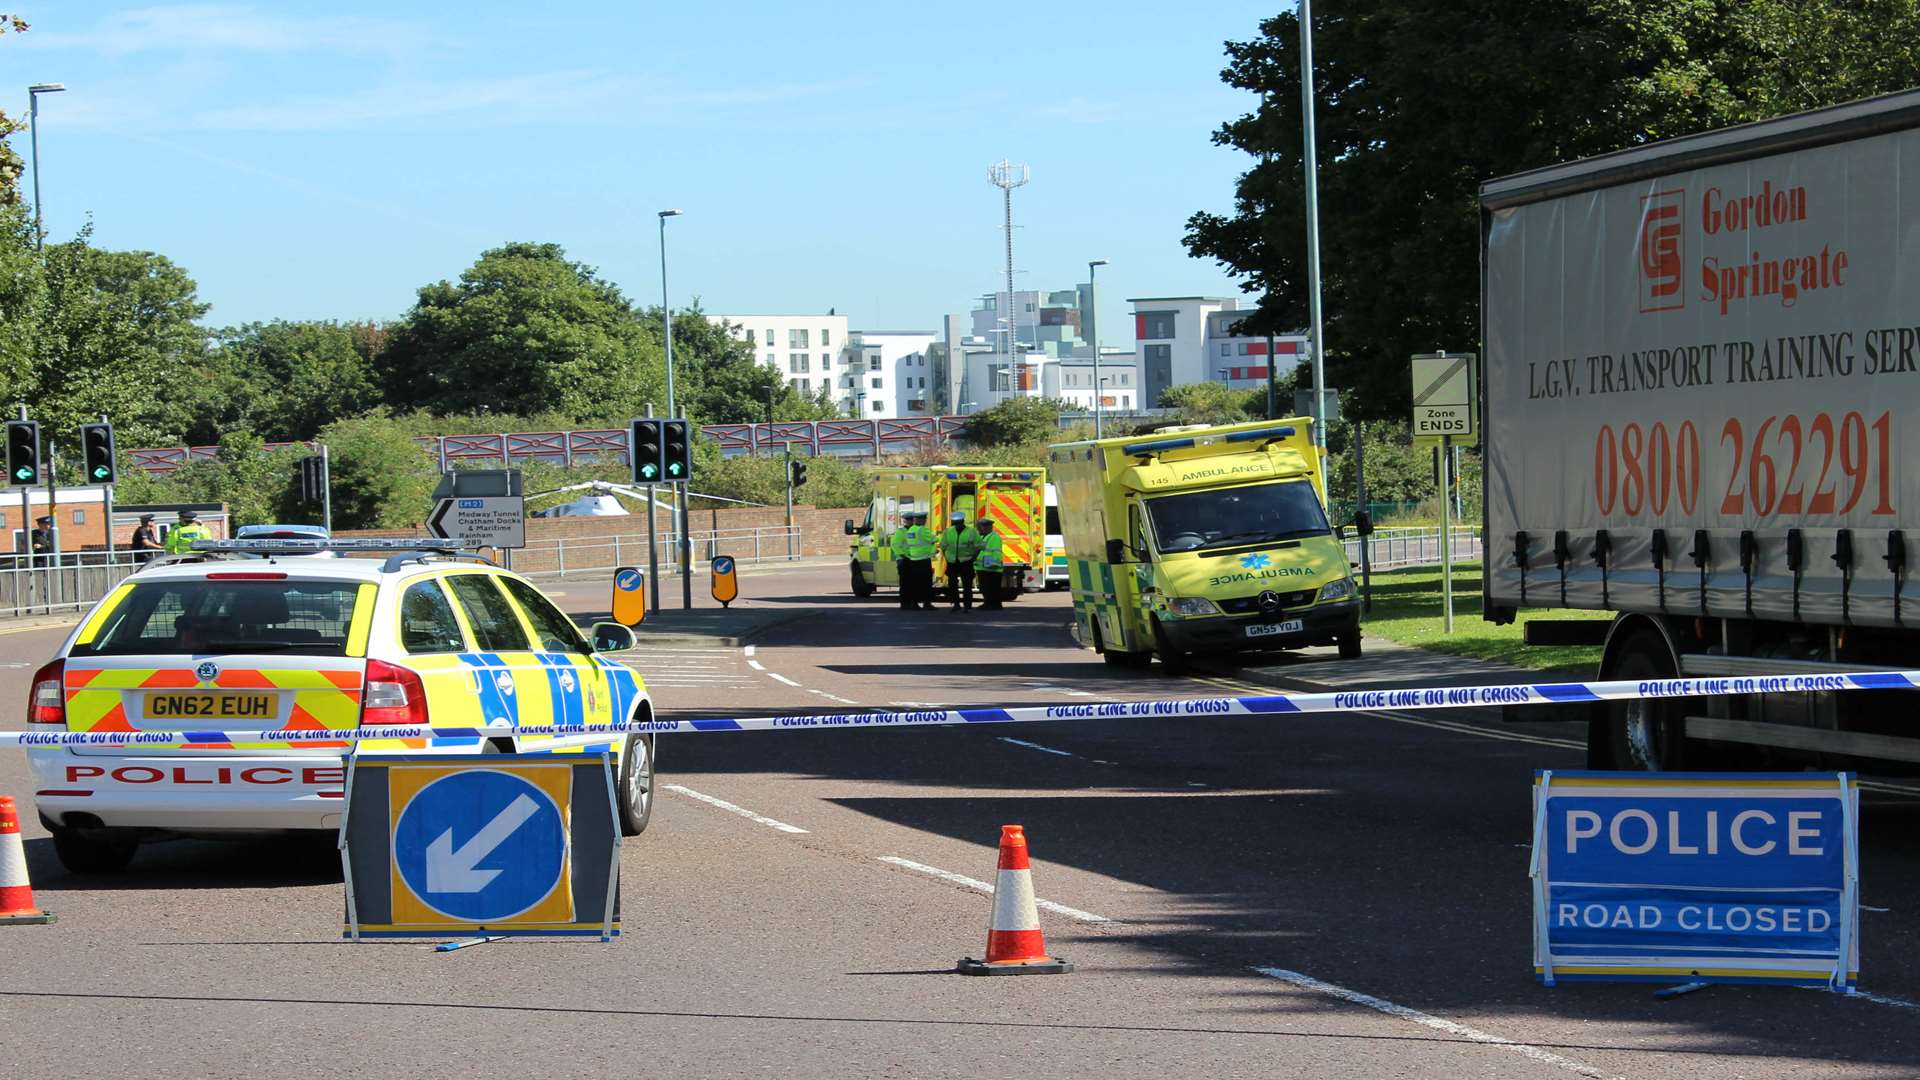 Police at the scene of a serious crash in Gillingham